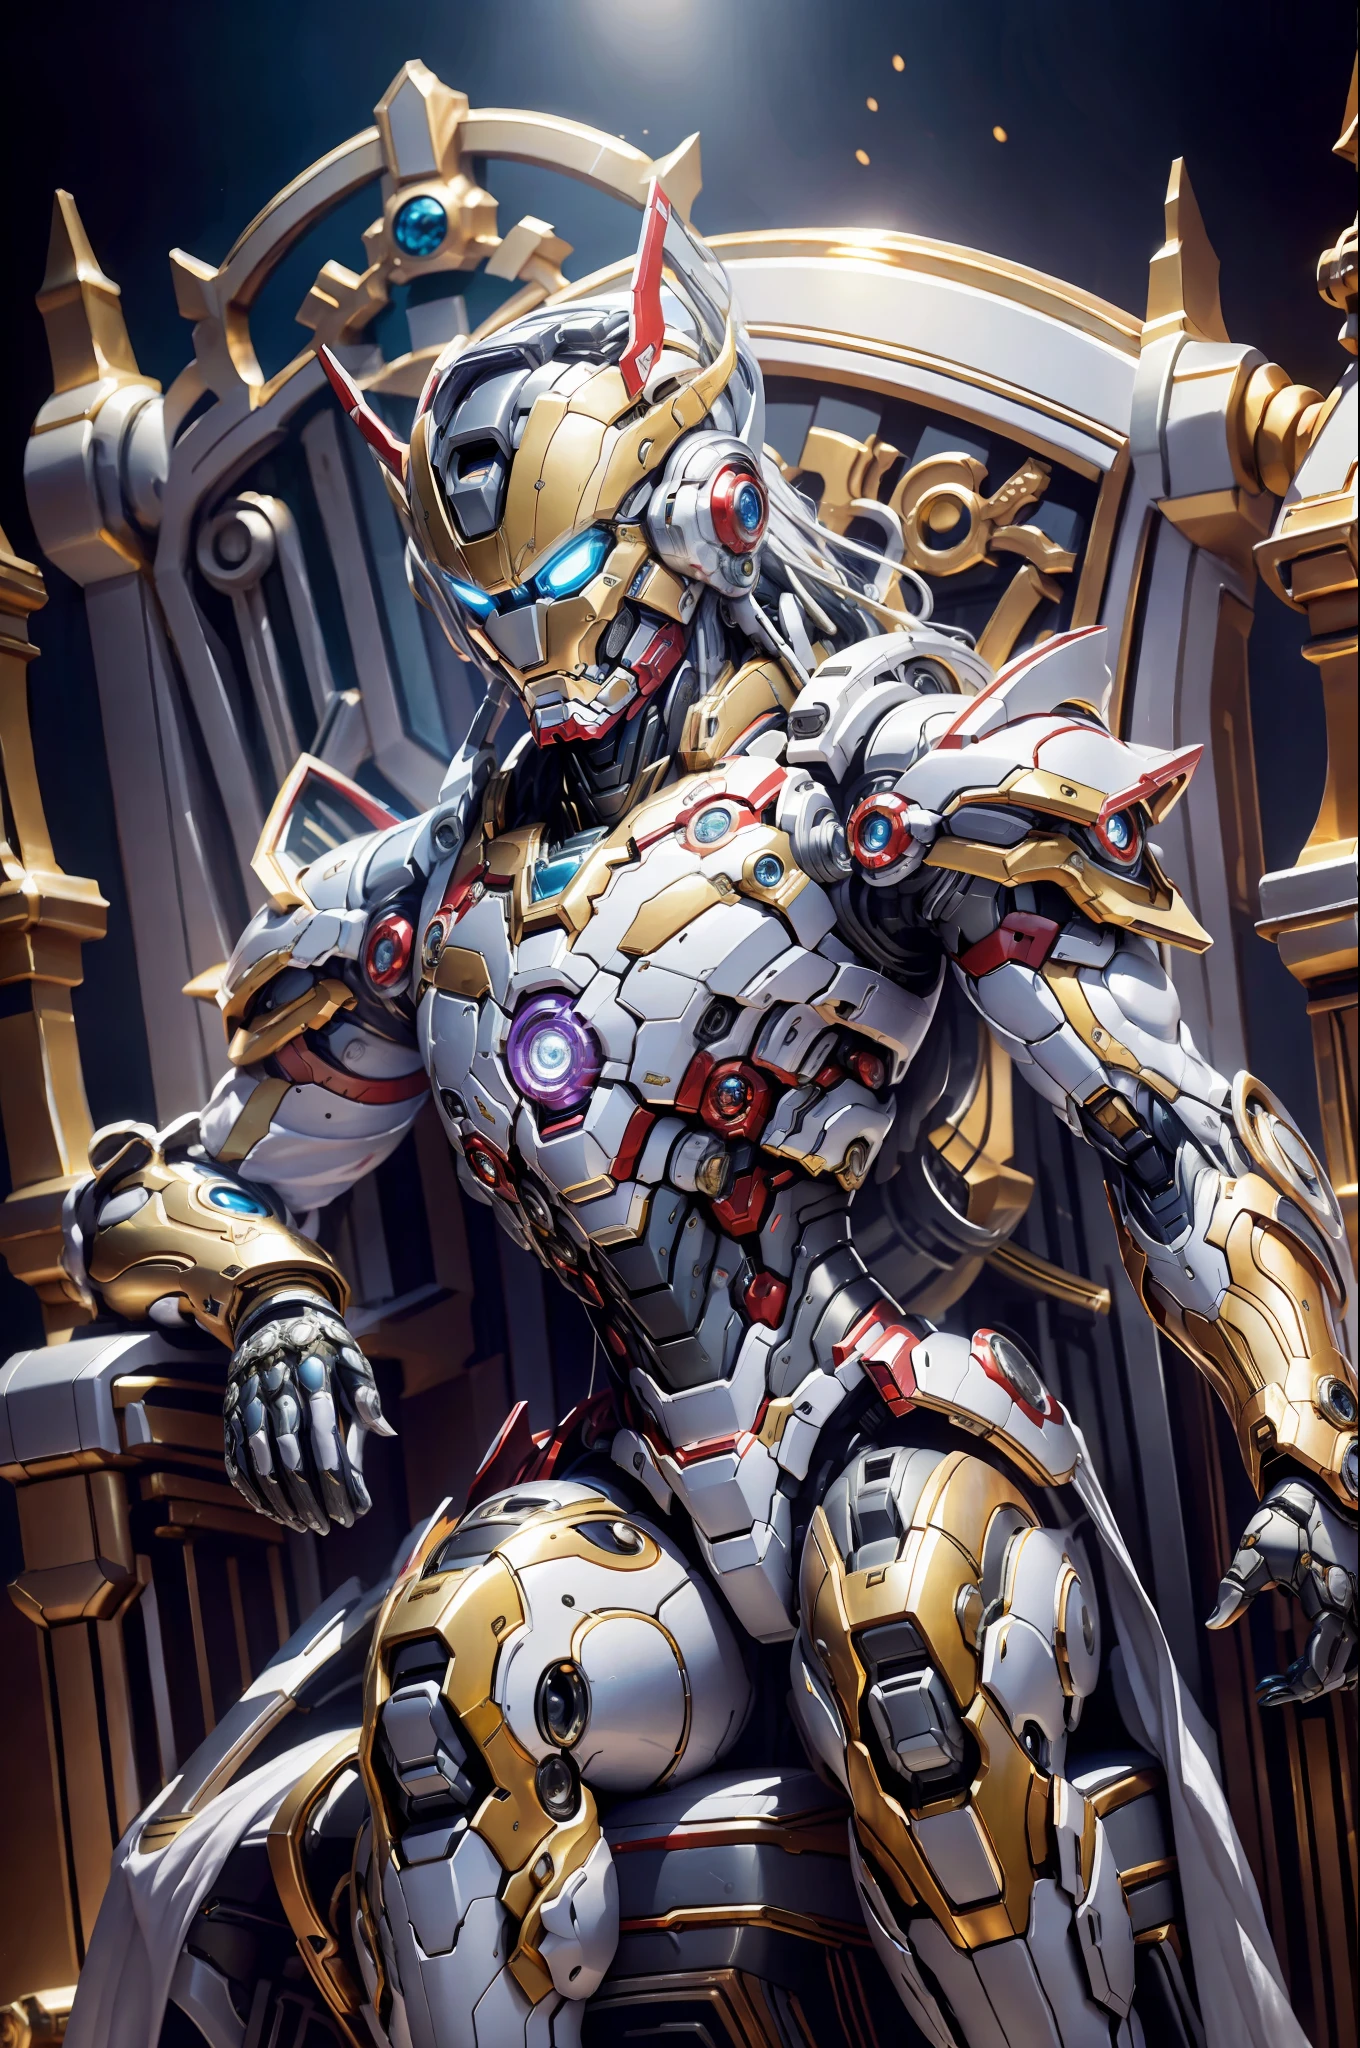 Cyberpunk style mecha Marvel Movie Iron Man Saint Seiya Kamen Rider Queen sitting on throne, ancient technology, ancient legends, white hair (white stockings: 1.5) (Throne: 1.4), sword, (mecha God of War), Egyptian style, (Saint Seiya: 1.7), Taoist symbols, (dragon pattern: 1.6), (gold thread: 1.5) ultra-realistic, Boca effect, shot in the style of David La Chapelle, bioluminescent palette: lilac, pale gold, bright white, ultra-fine, cinematic still life, vibrancy, Unrealistic engine style, Sakimichan, lower chest, perfect eyes, highest image quality 16K, inspired by Harry Winston, shot on Canon EOS R 6, masterpiece, --Chaos 50, gray hair, crown, mole under the eyes, gitchham, wide angle, canon, from above, projection illustration, ray tracing, surrealism, textured skin --s2